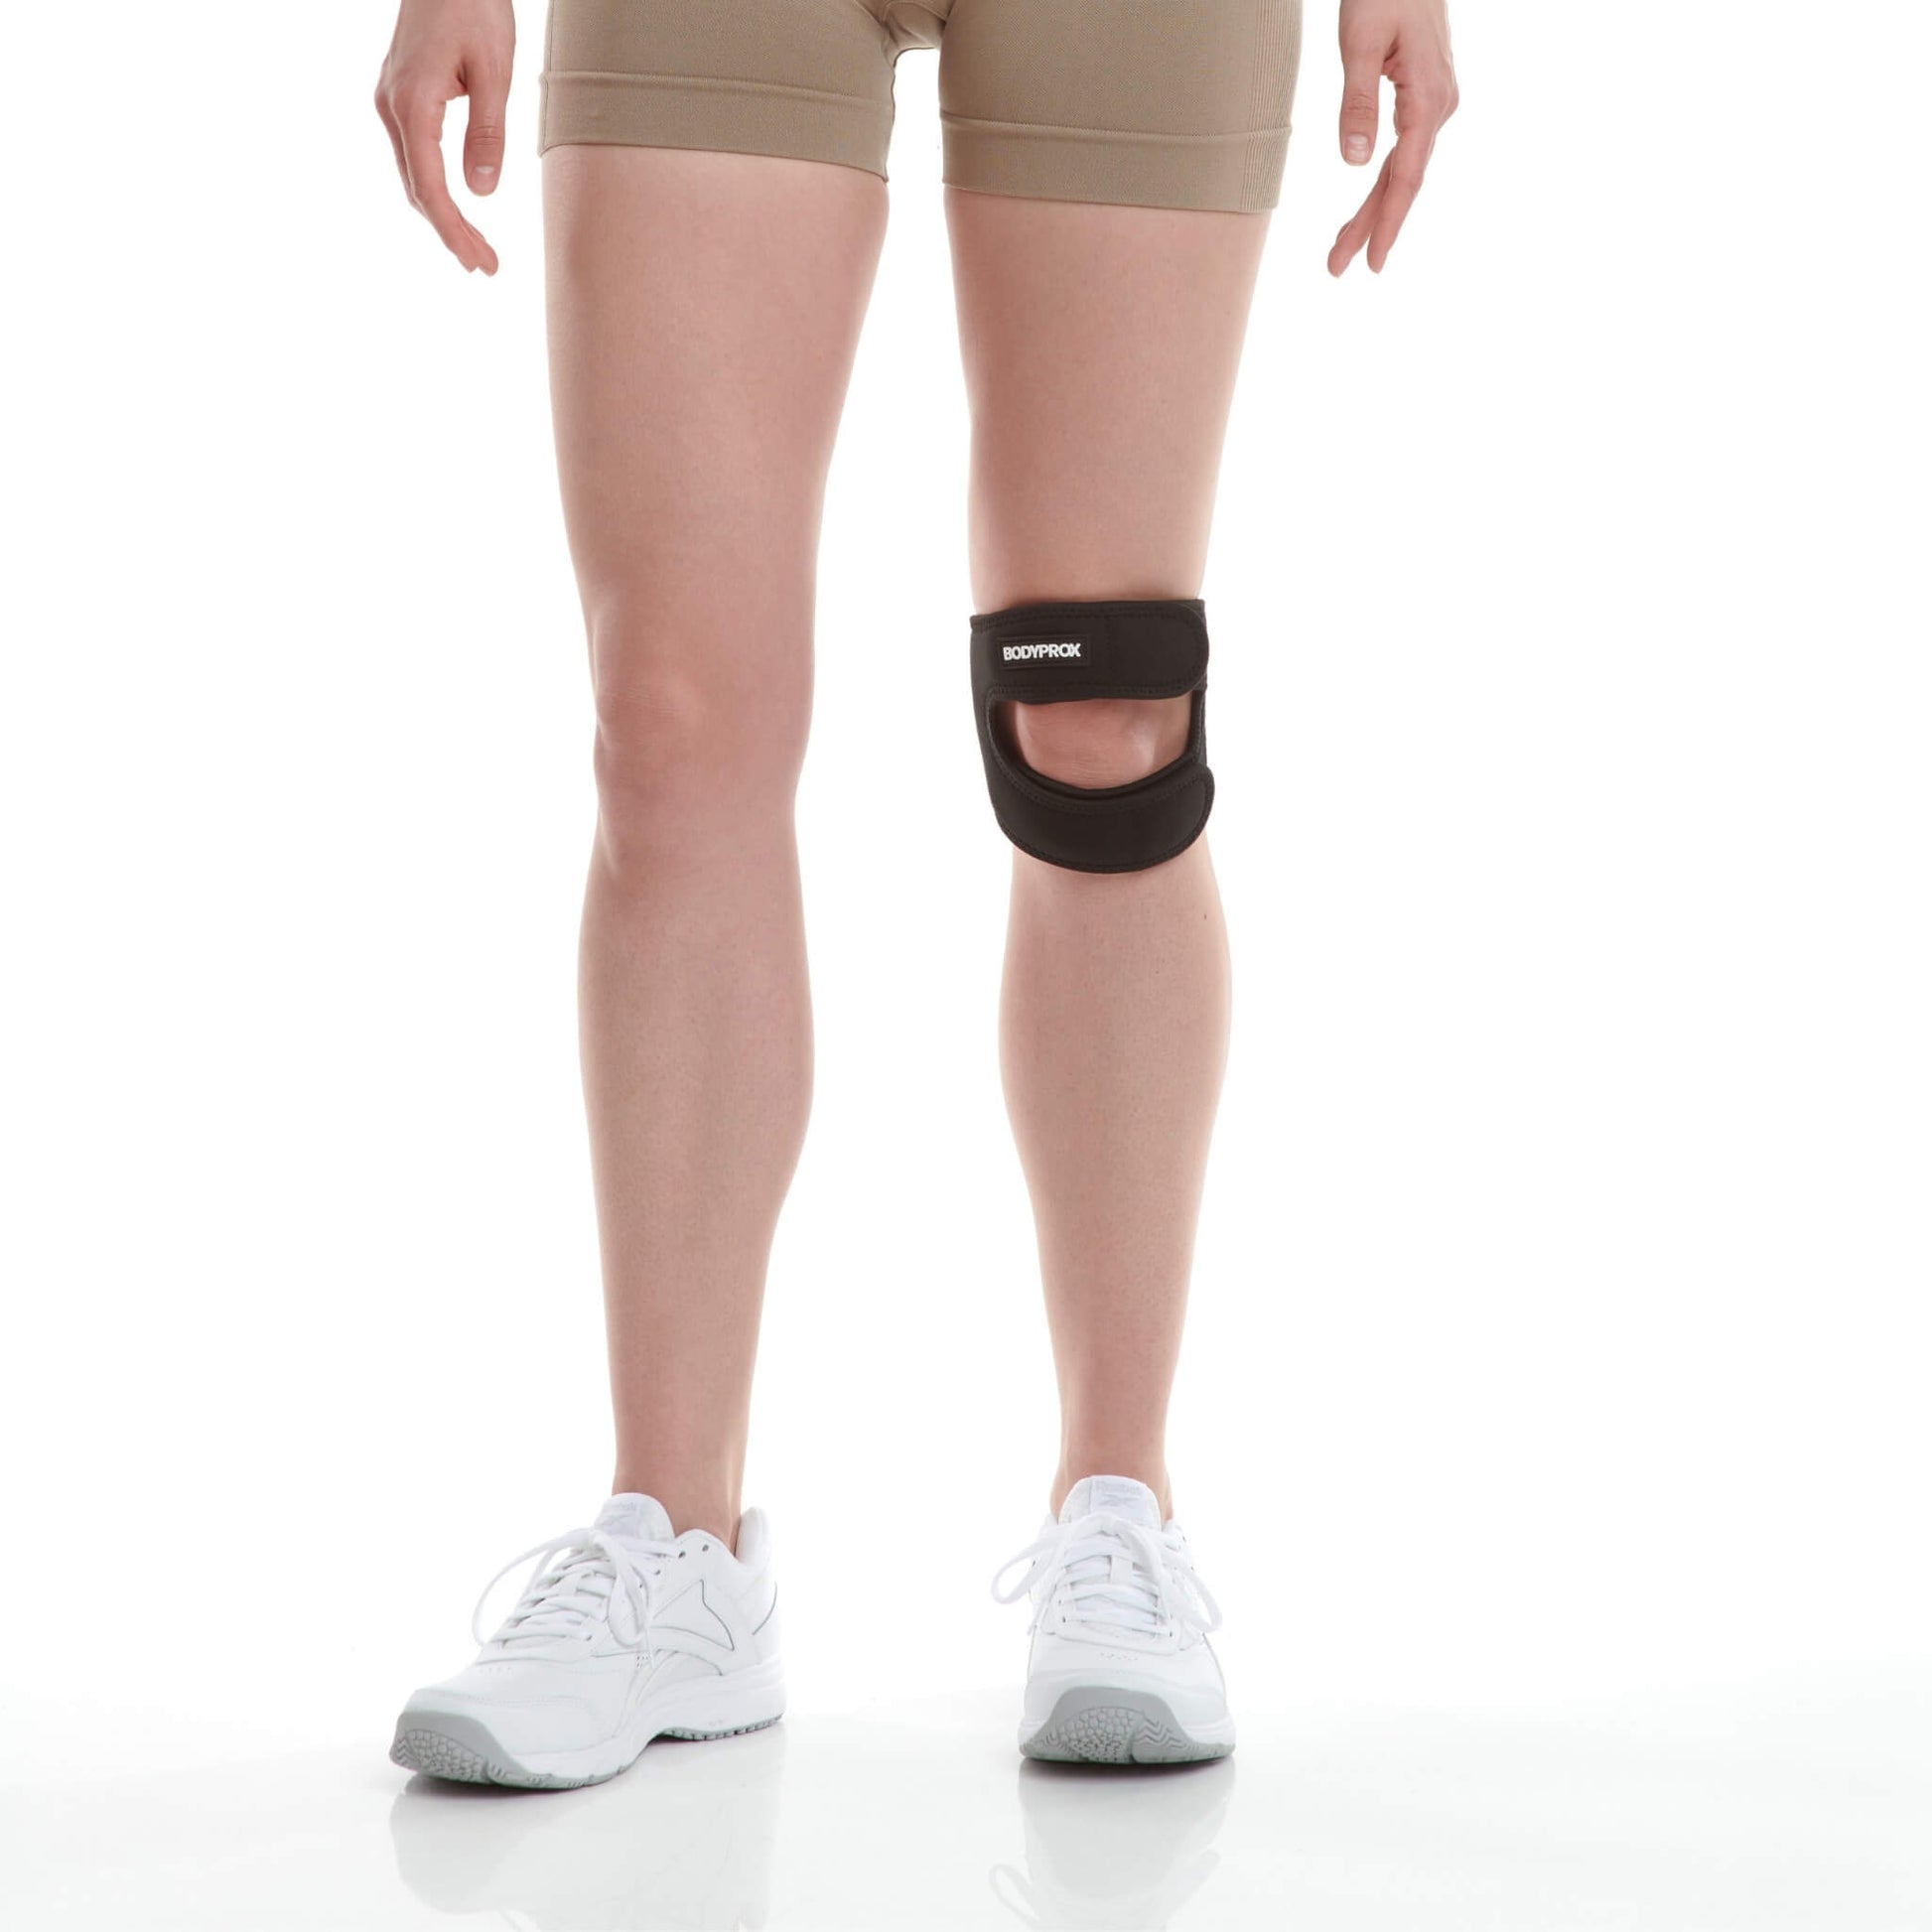  ABYON Adjustable Knee Brace For Knee Pain Relief